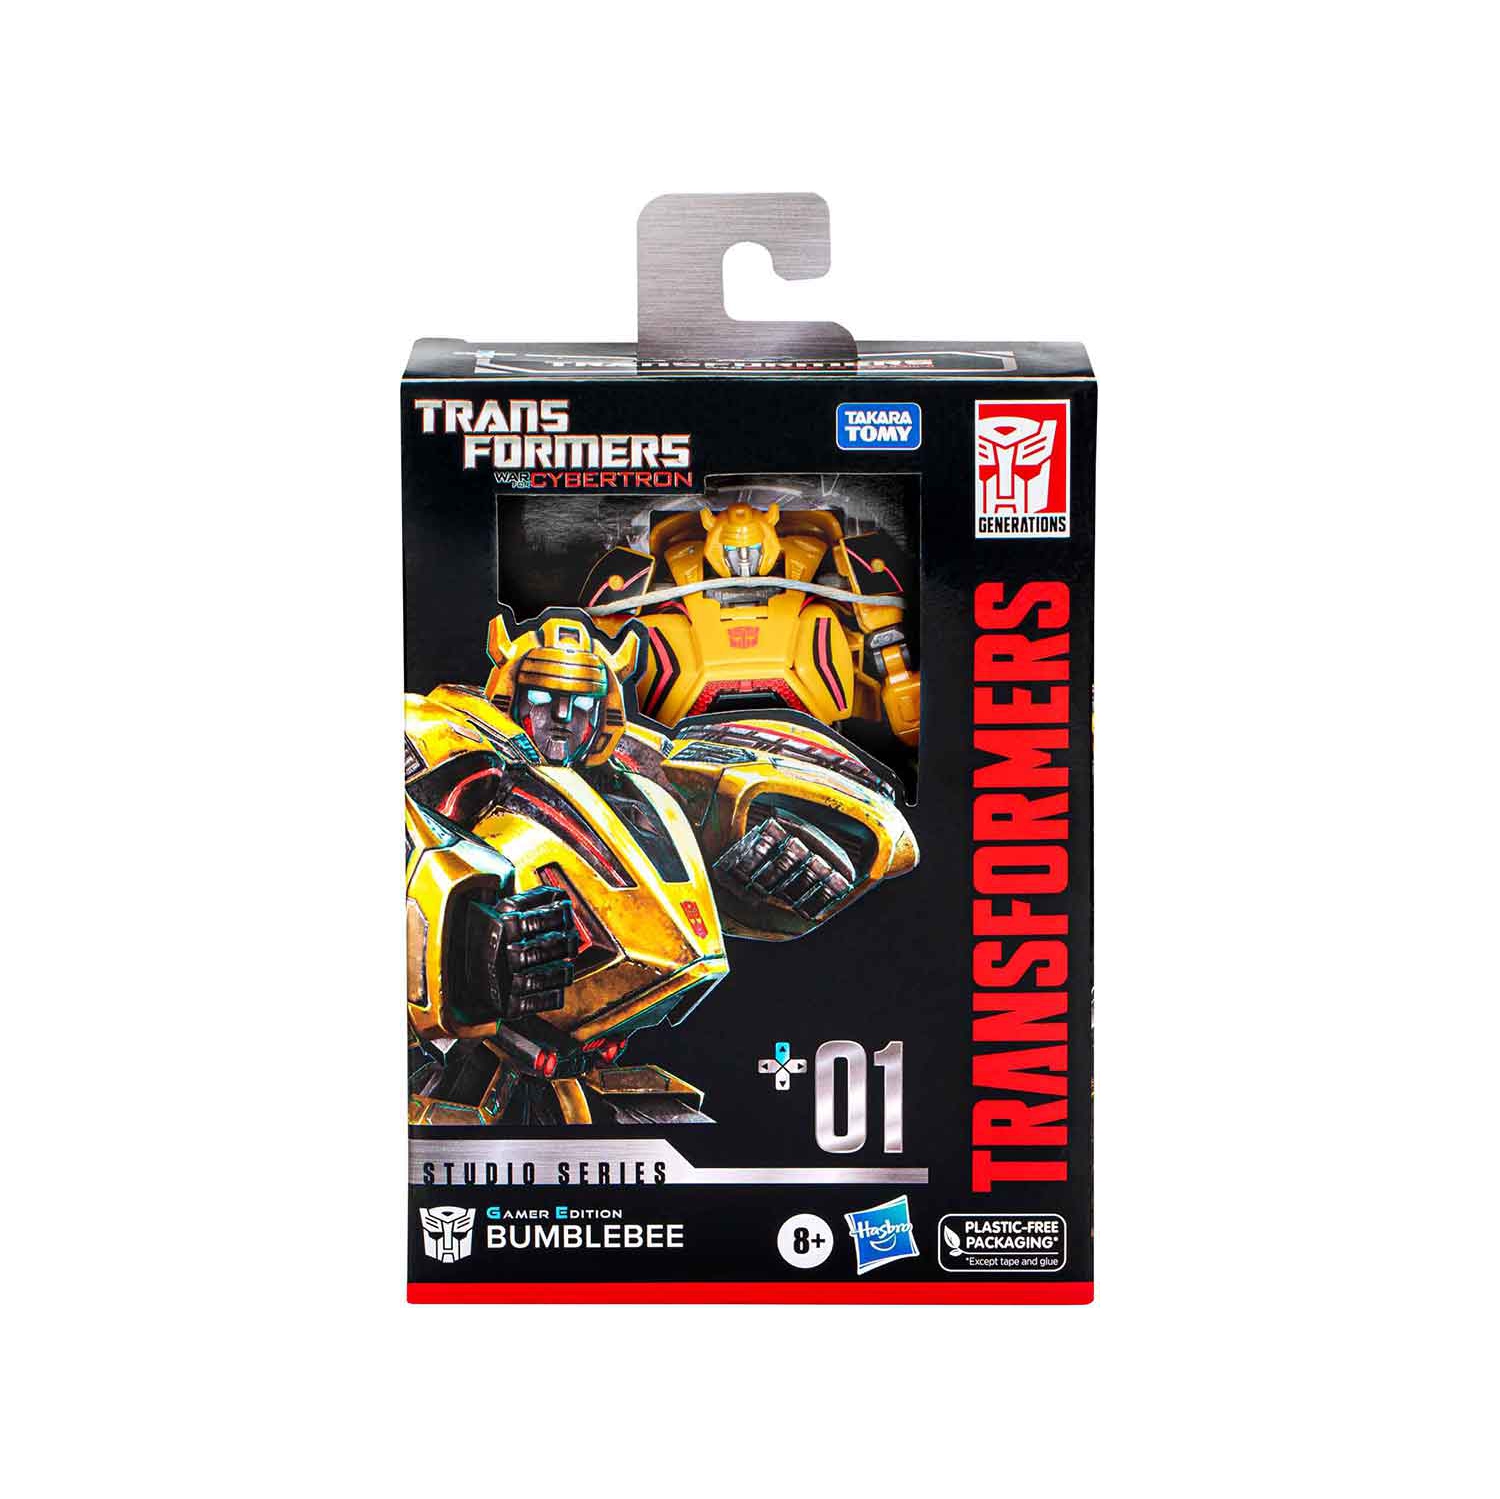 Transformers WFC Studios Series 6 Inch Action Figure Deluxe Class (2023 Wave 1) - Gamer Edition Bumblebee #1